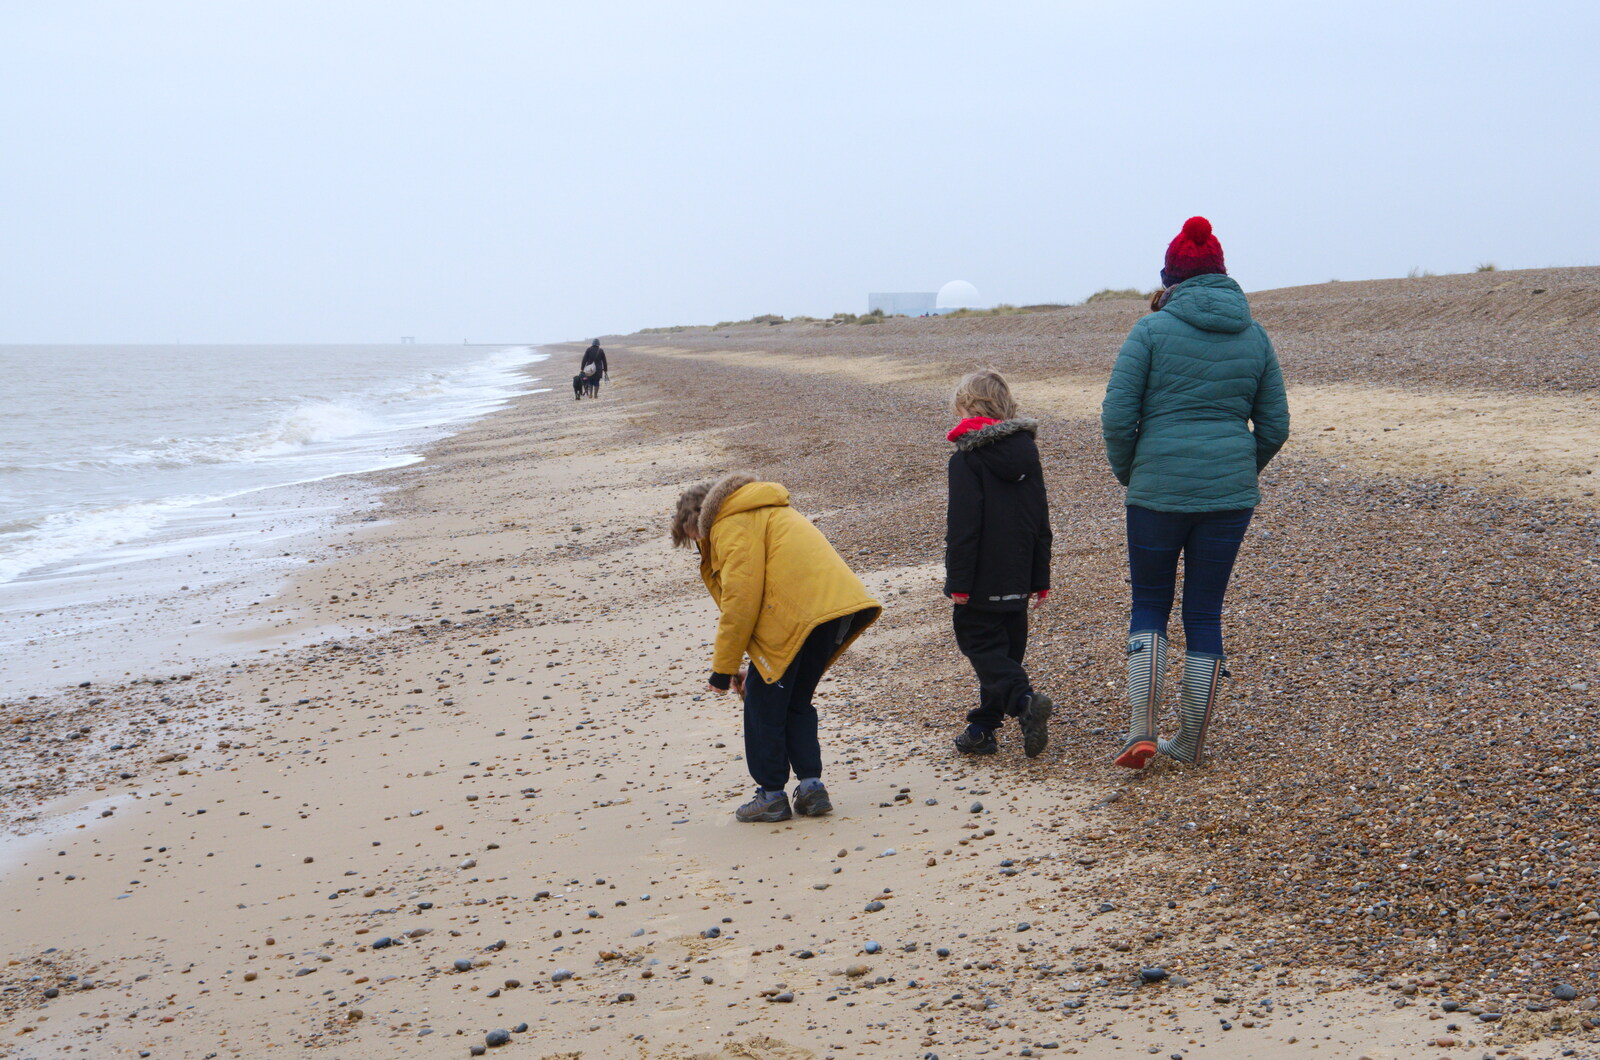 The gang on the bech from A Trip to the Beach, Dunwich Heath, Suffolk - 27th December 2019